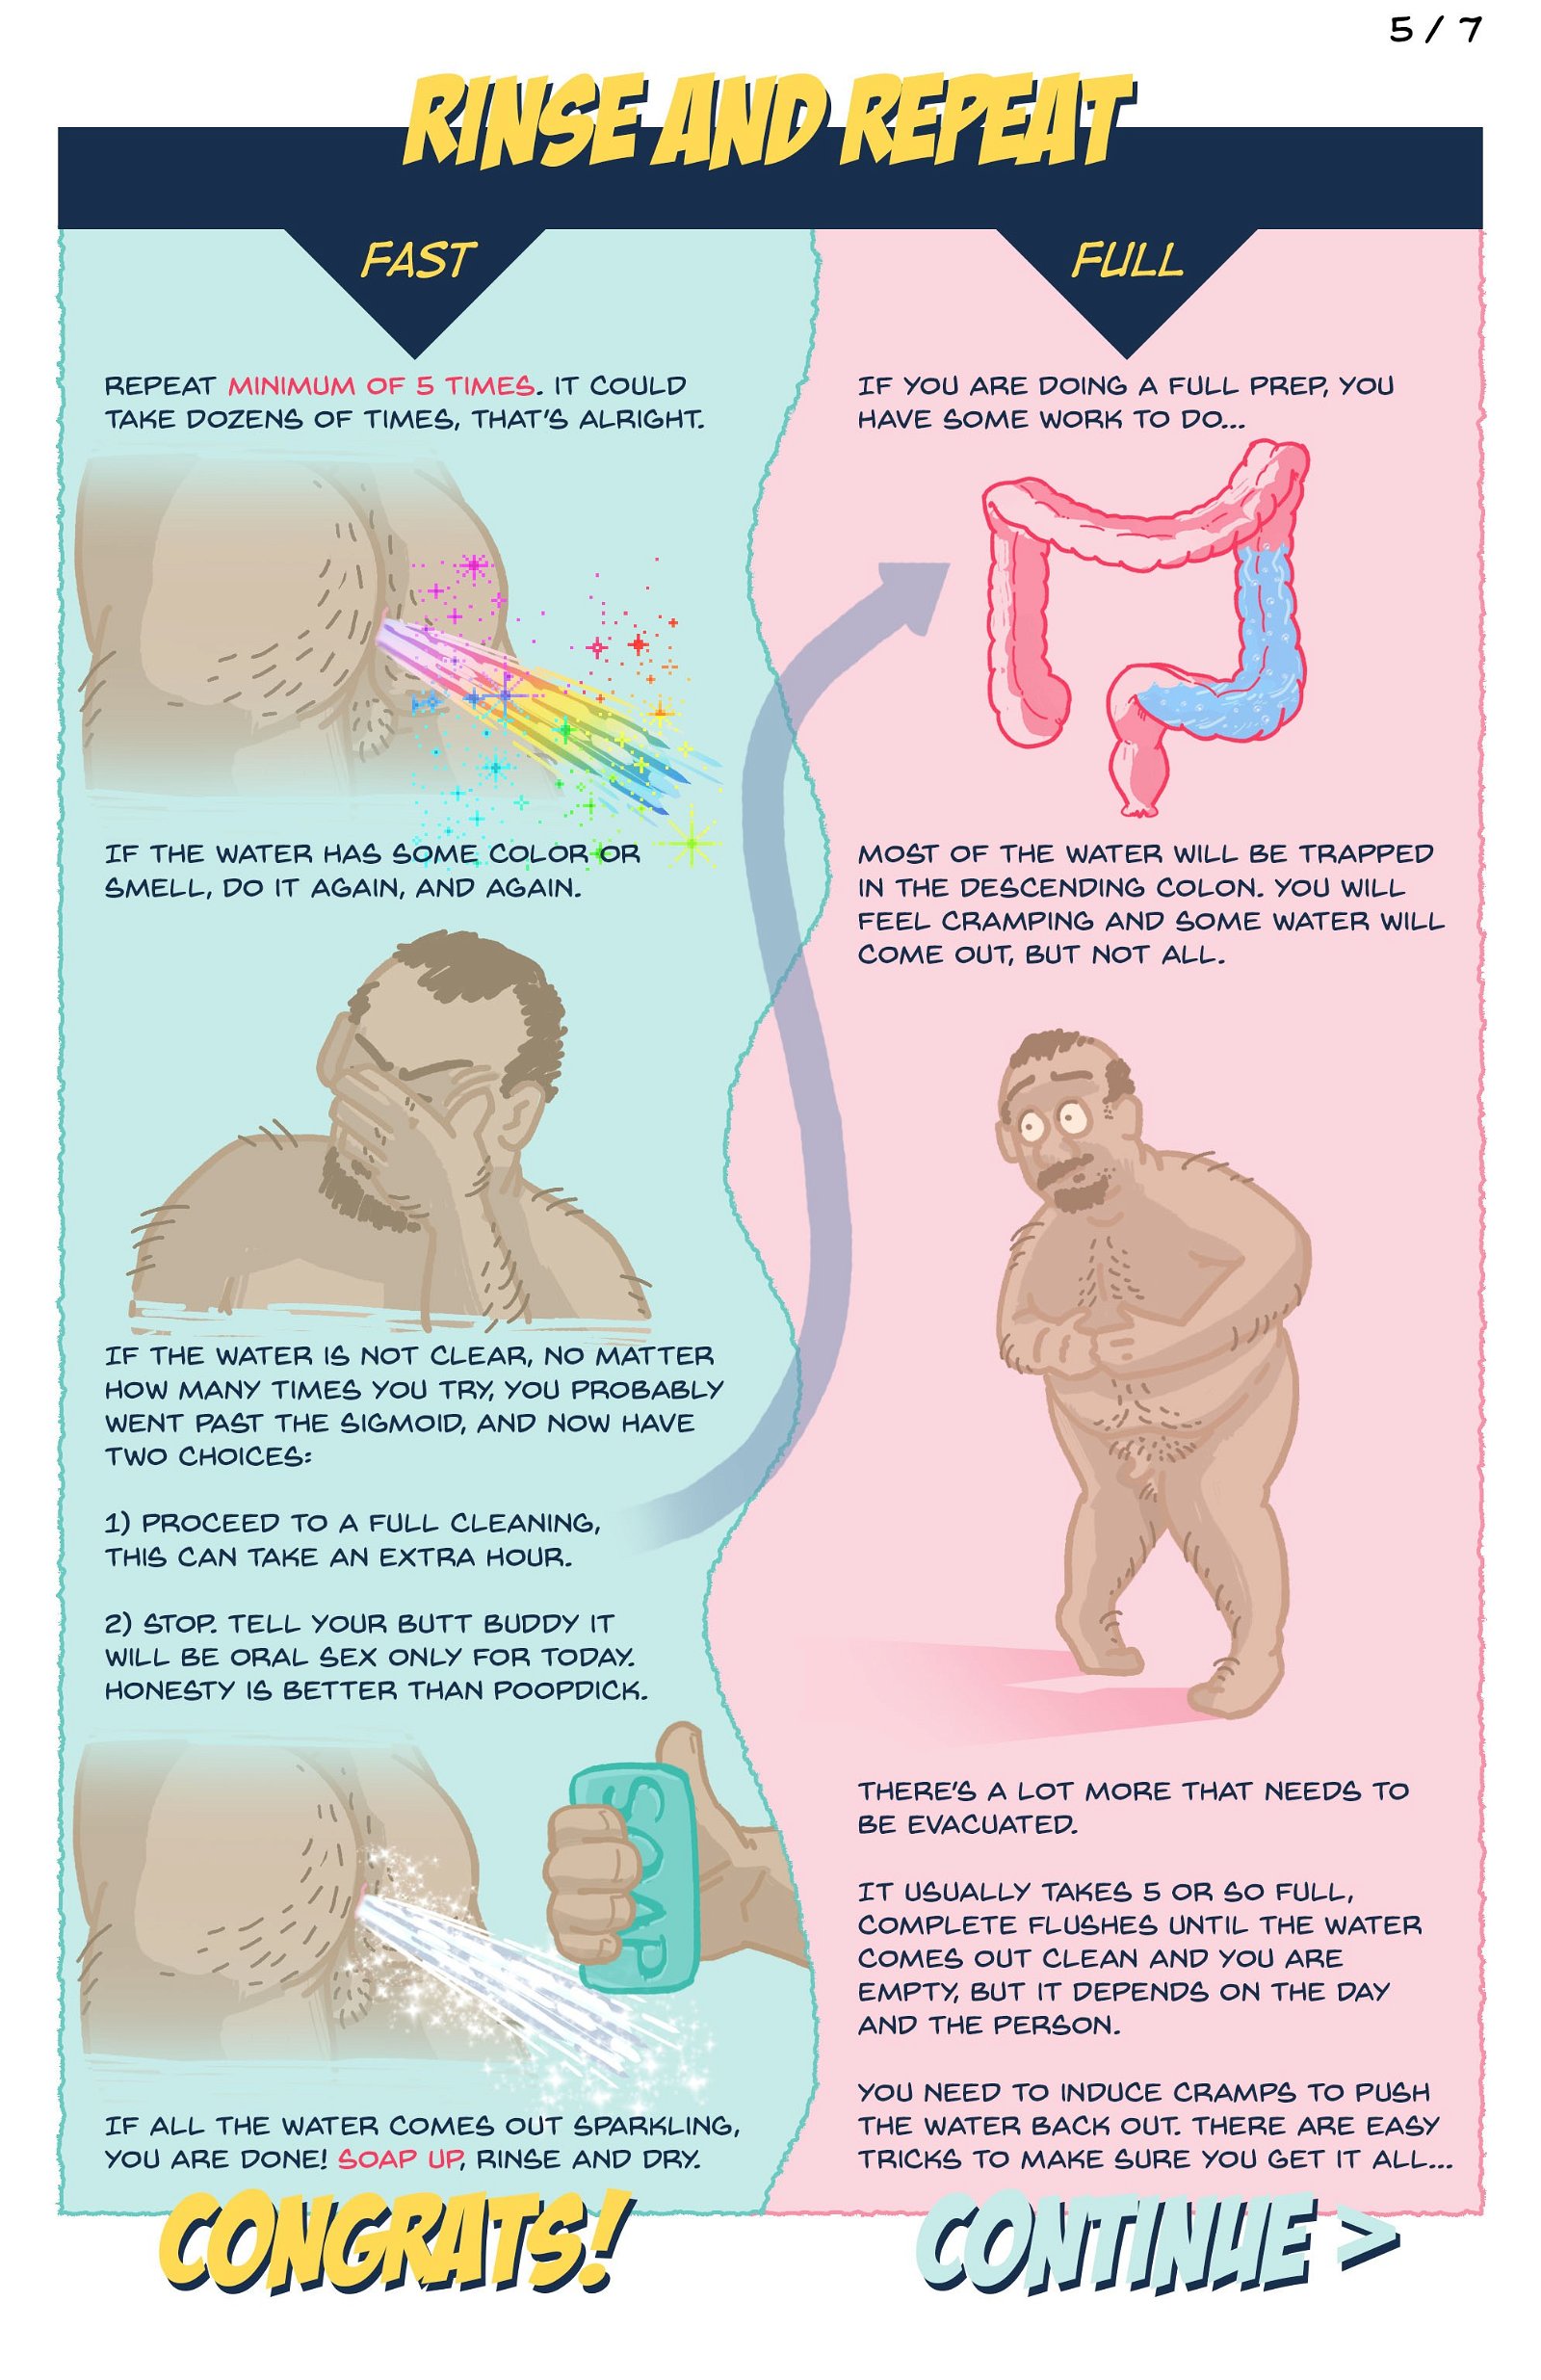 Watch the Photo by Hosiroma with the username @Hosiroma, posted on October 31, 2018 and the text says 'h0nchkr0w:


dead-stray-cat:

blindjaw:
I just finished writing and illustrating this ass-cleaning guide. Please do share it, all good bottoms need to know this information. You can also share the link outside of Tumblr, easy to remember:..'